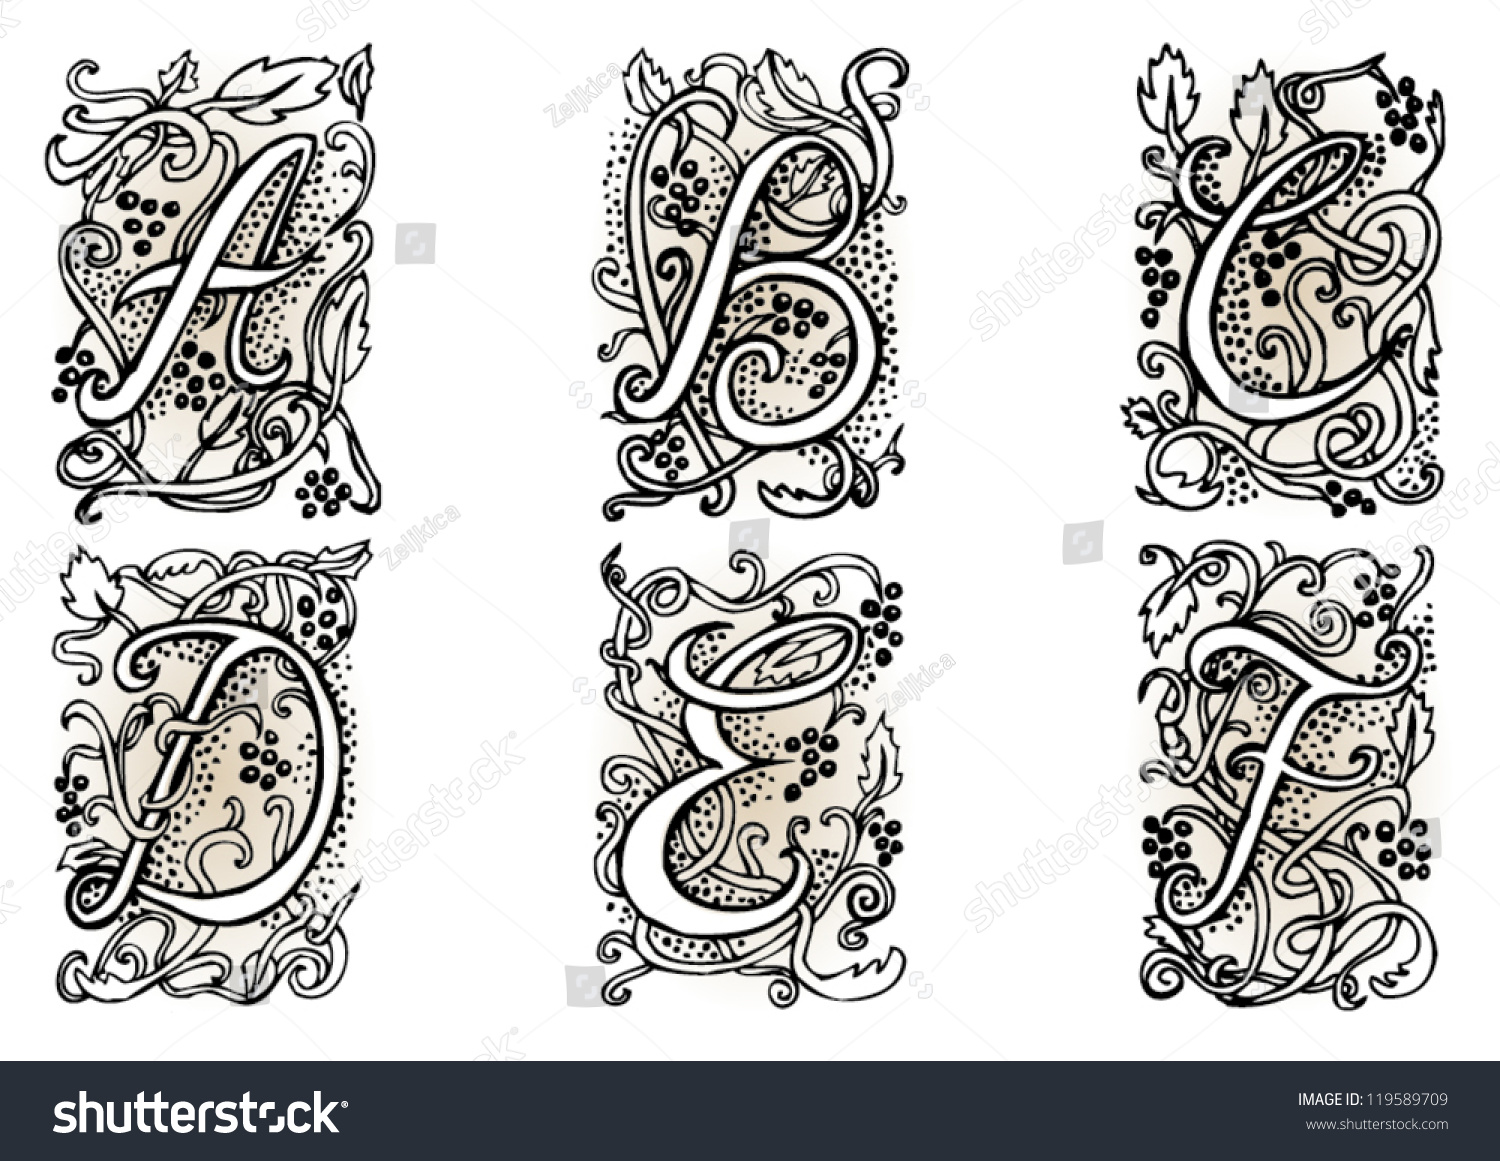 Hand Drawn Artistic Vector Fairytale Letters Stock Vector 119589709 ...